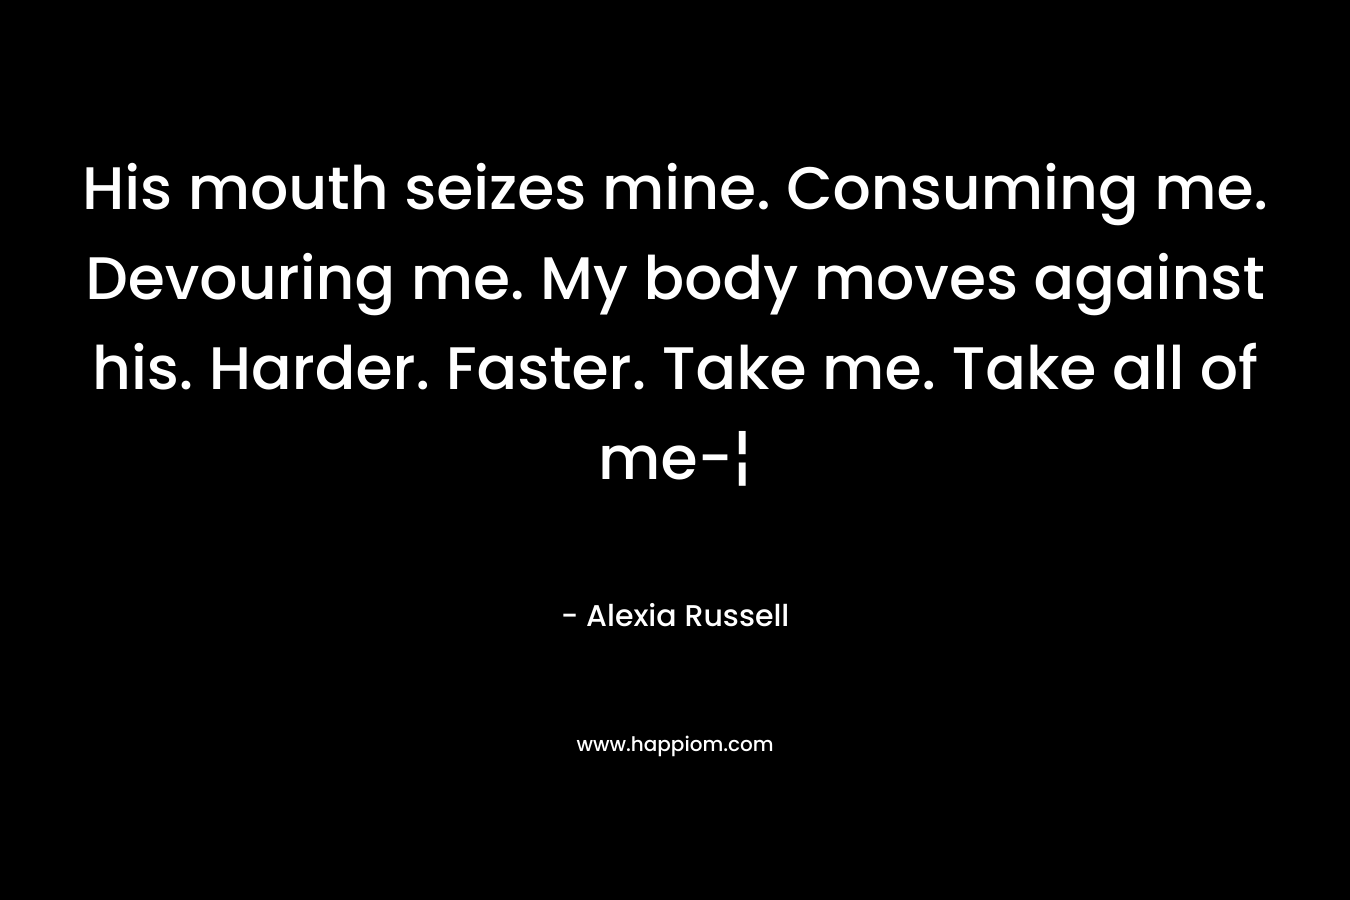 His mouth seizes mine. Consuming me. Devouring me. My body moves against his. Harder. Faster. Take me. Take all of me-¦ – Alexia Russell